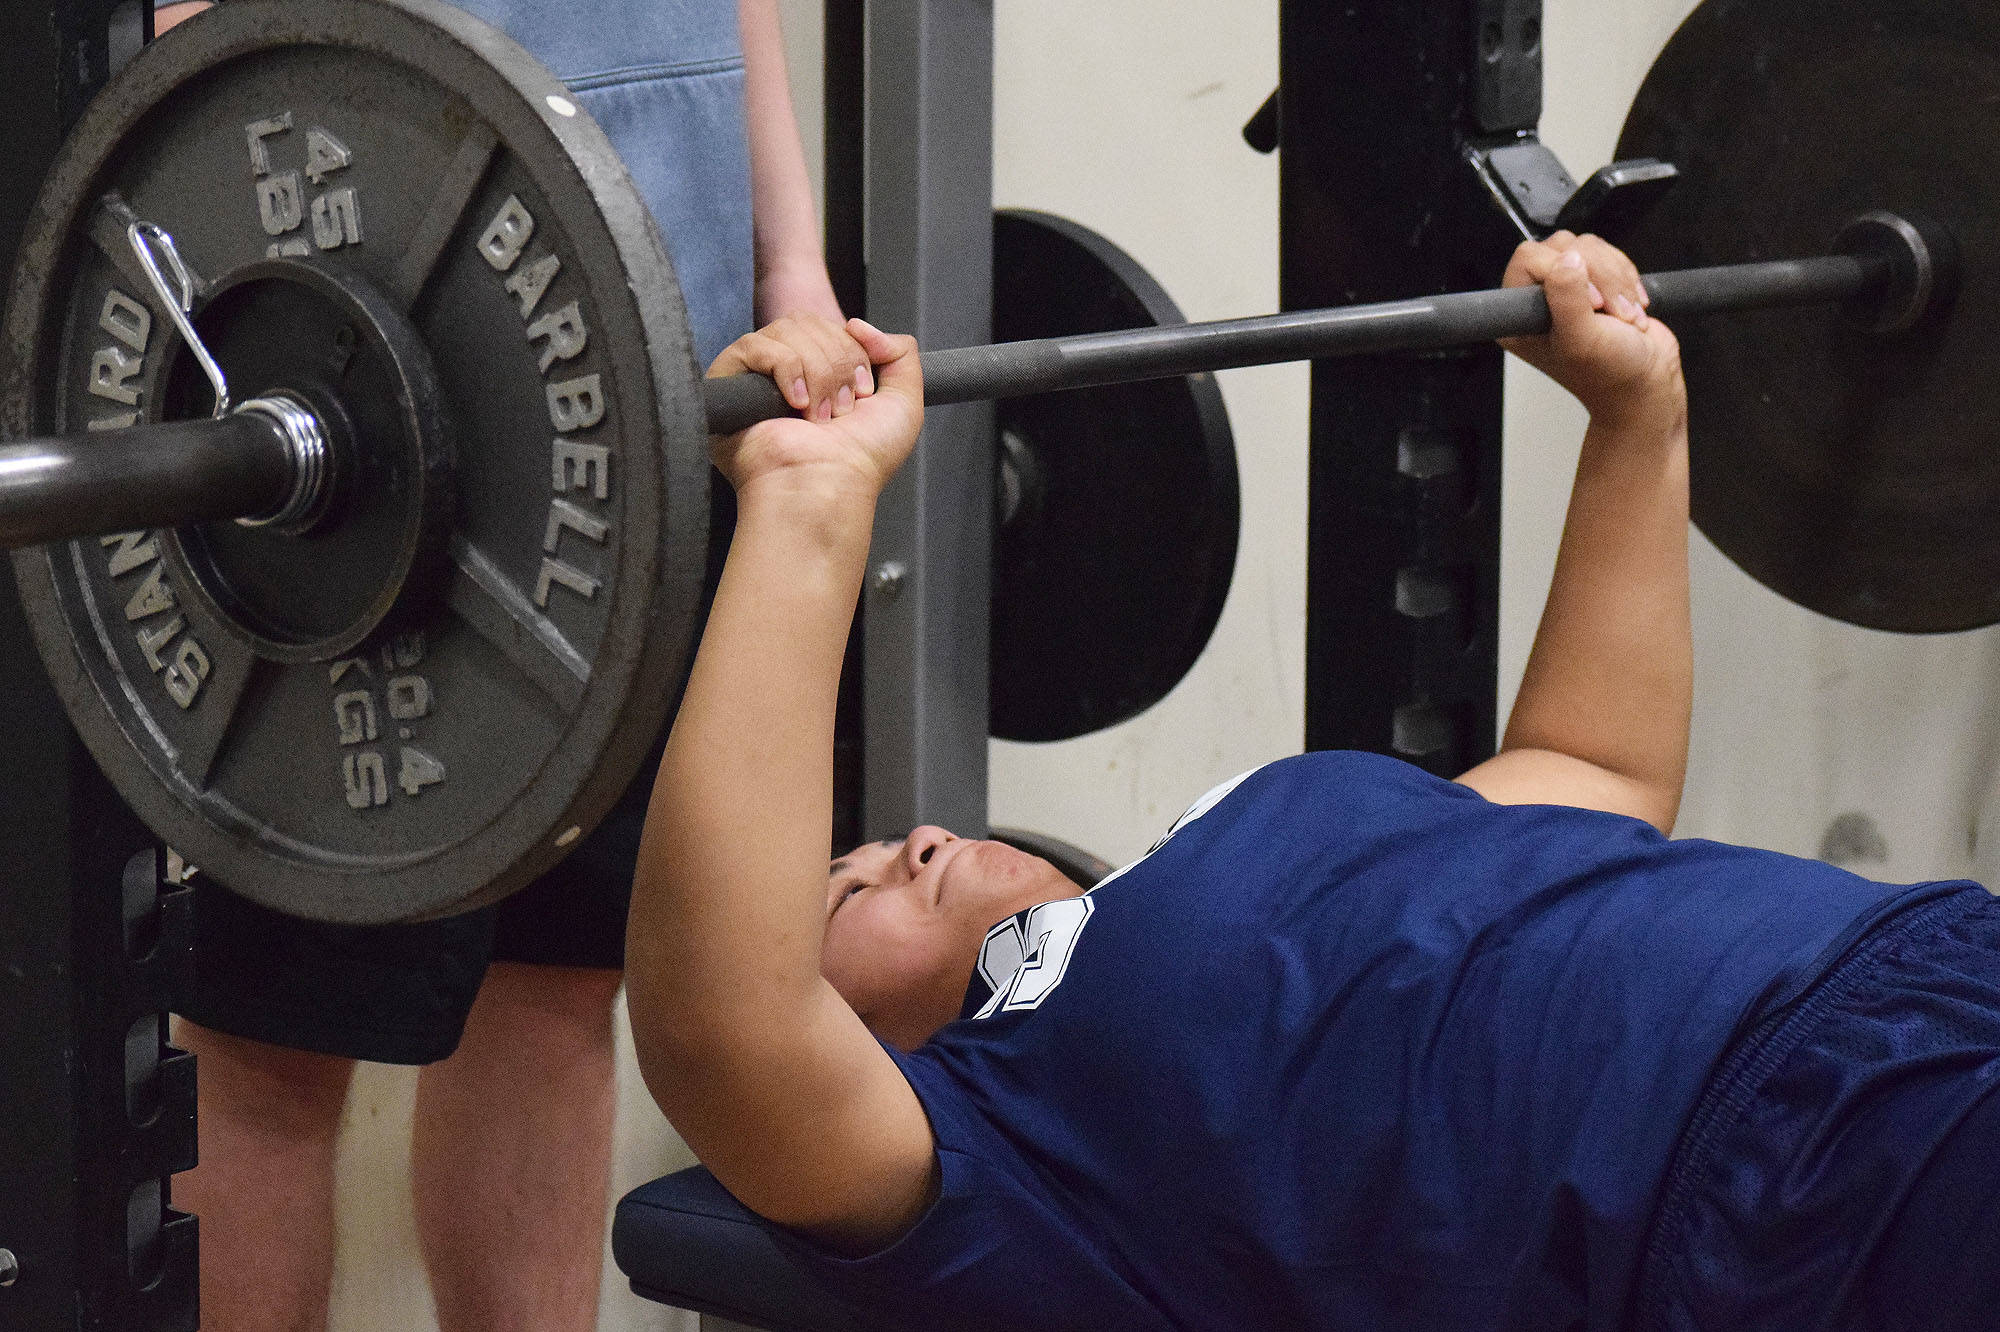 Soldotna freshman Ituau Tuisaula benches in the 9th-10th grade girls contest Wednesday evening at the 11th biannual CrossFit Competition at Soldotna High School. (Photo by Joey Klecka/Peninsula Clarion)